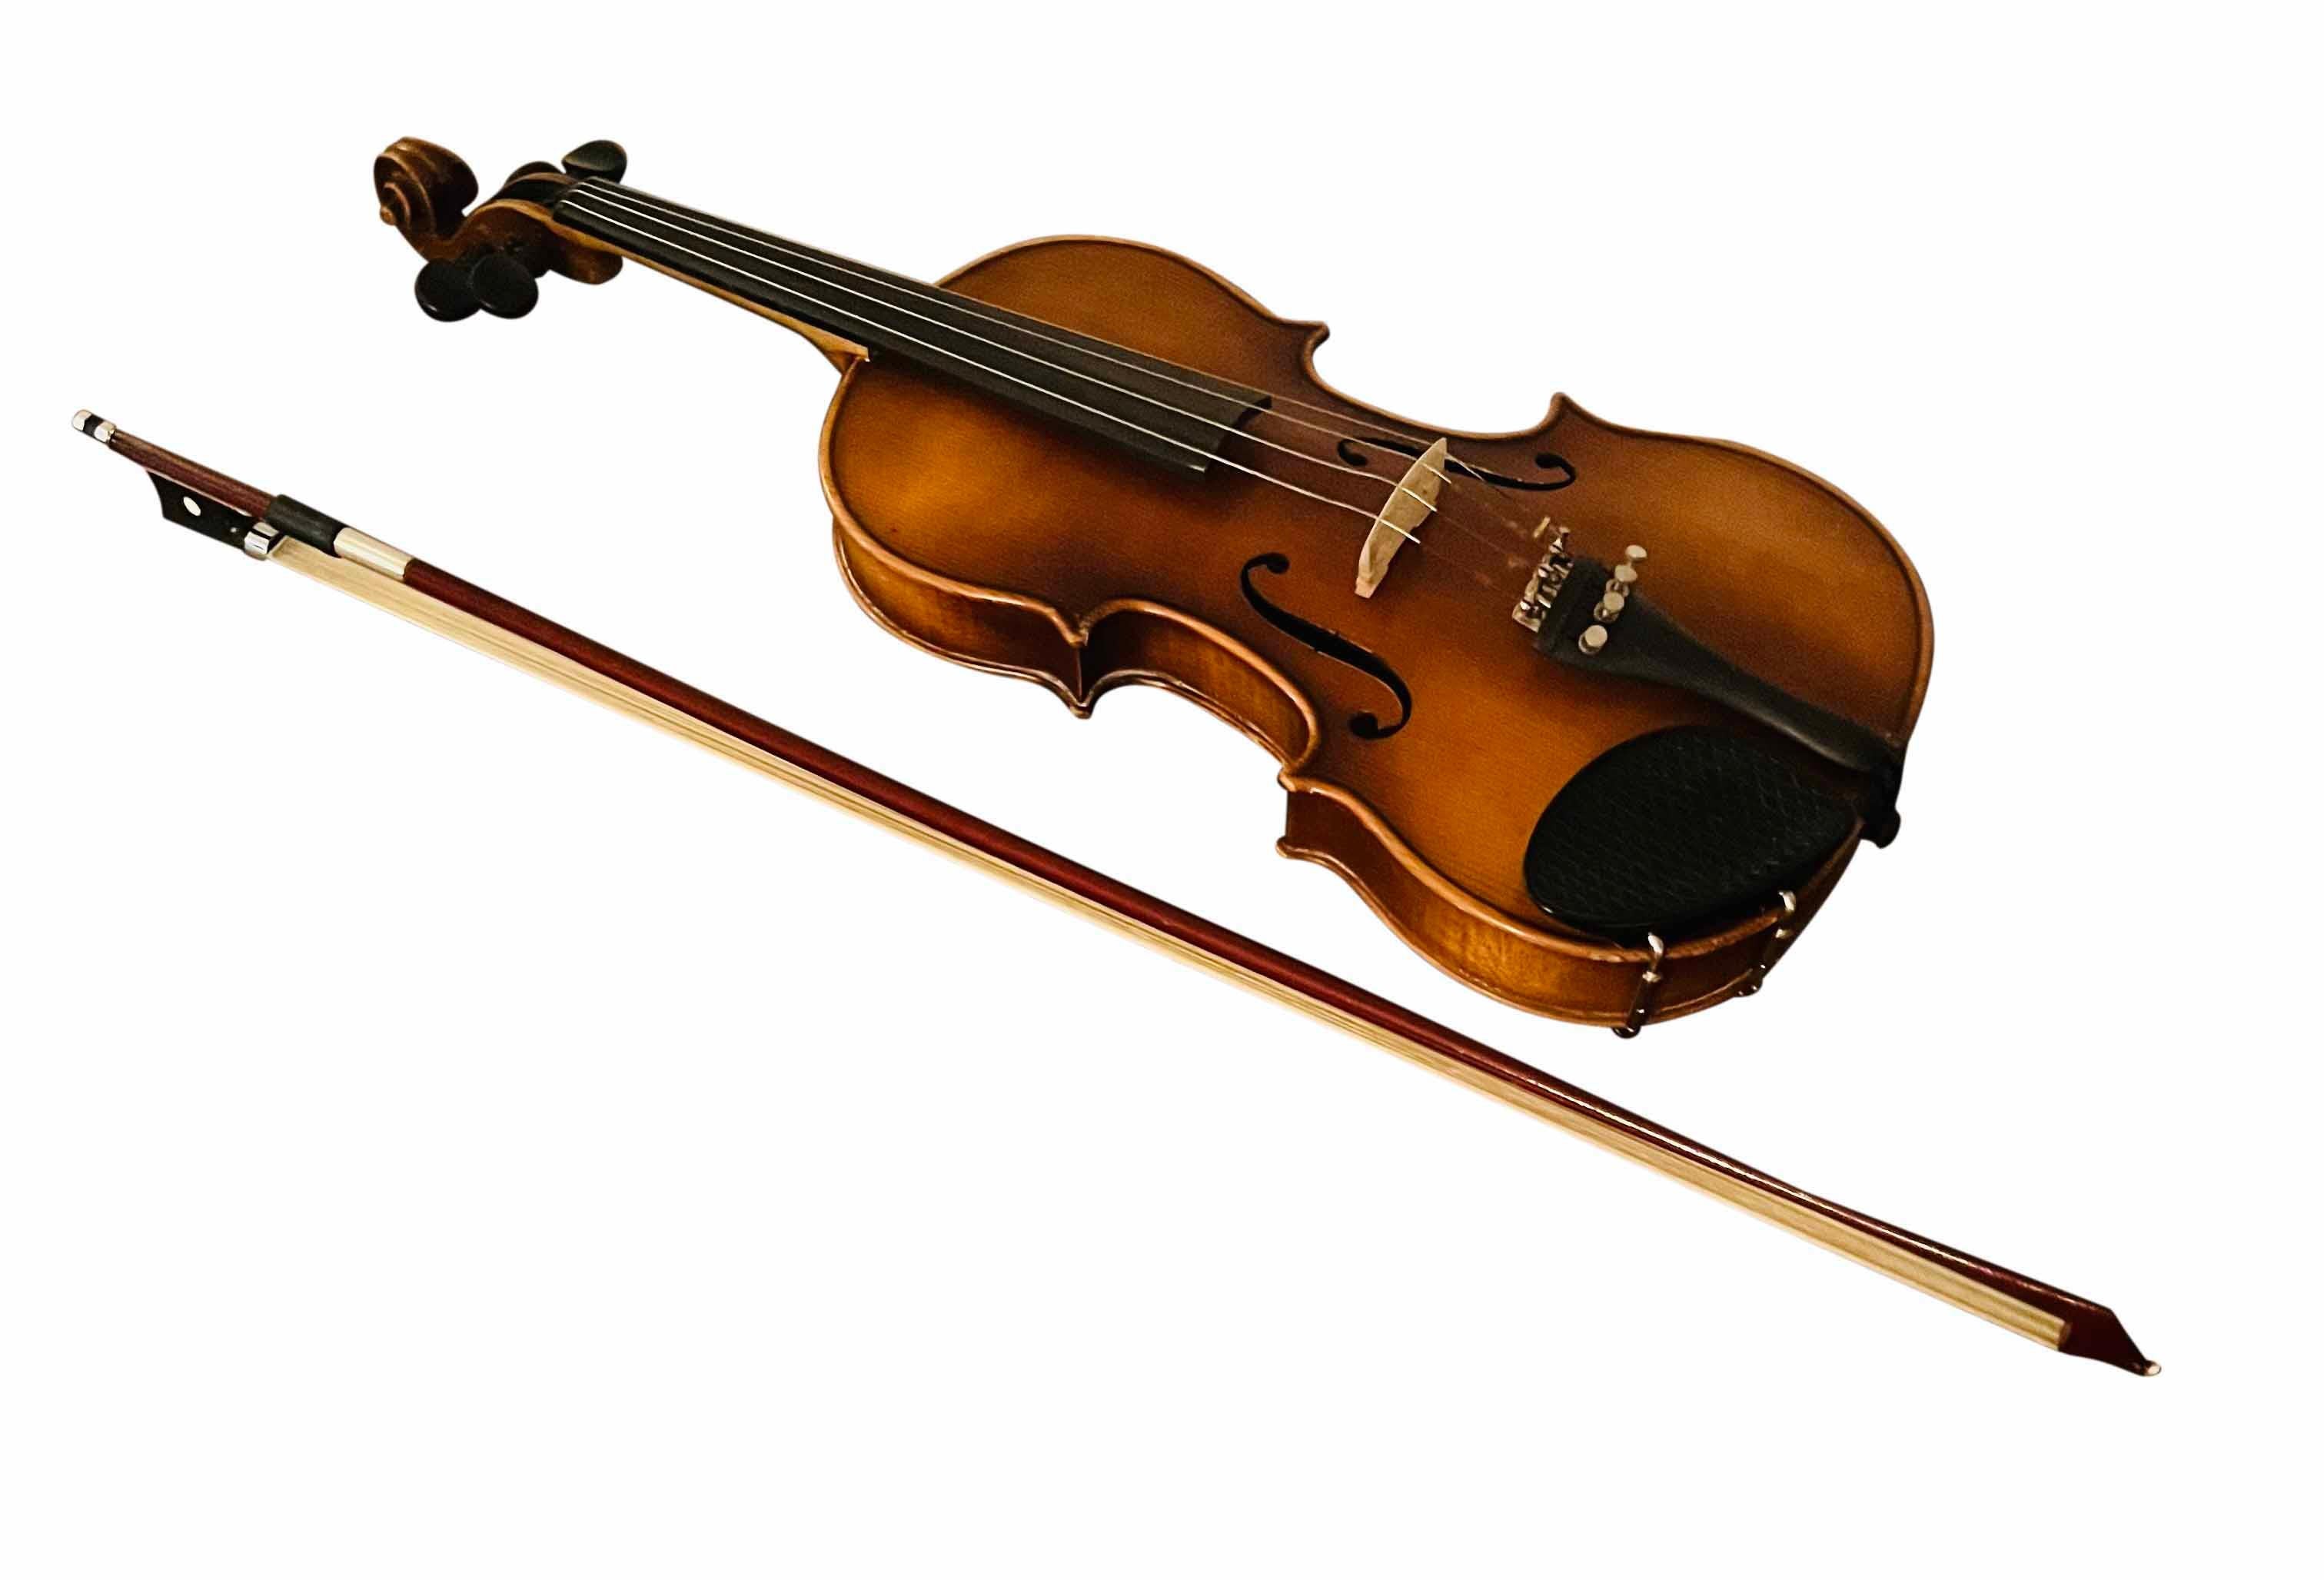 1970 3/4 E.R. Pfretzschner Hand-Crafted Violin in the Style of A. Stradivarius im Angebot 12